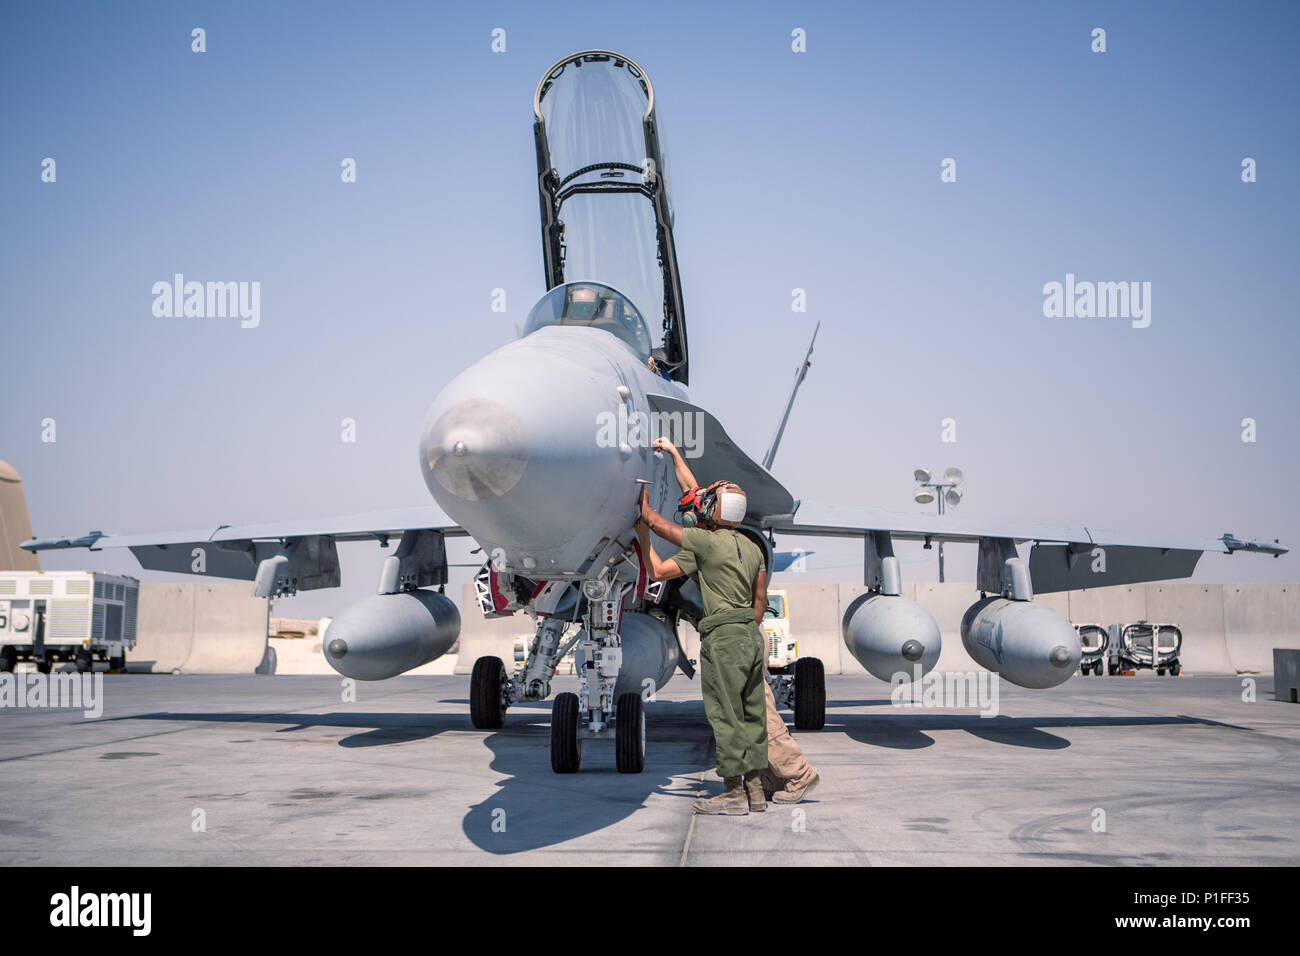 U.S. Marines with Marine All-Weather Fighter Attack Squadron 533, Special Purpose Marine Air-Ground Task Force - Crisis Response - Central Command 16.2, inspect an F/A-18D before takeoff at an undisclosed location in Southwest Asia, Oct. 15, 2016. VMFA(AW)-533 departed the CENTCOM area of responsibility, completing deployment as part of the Aviation Combat Element of SPMAGTF-CR-CC.  The squadron conducted strikes in support of Operation Inherent Resolve, the operation to eliminate the ISIL terrorist group and the threat they pose to Iraq, Syria, and the wider international community. (U.S. Mar Stock Photo